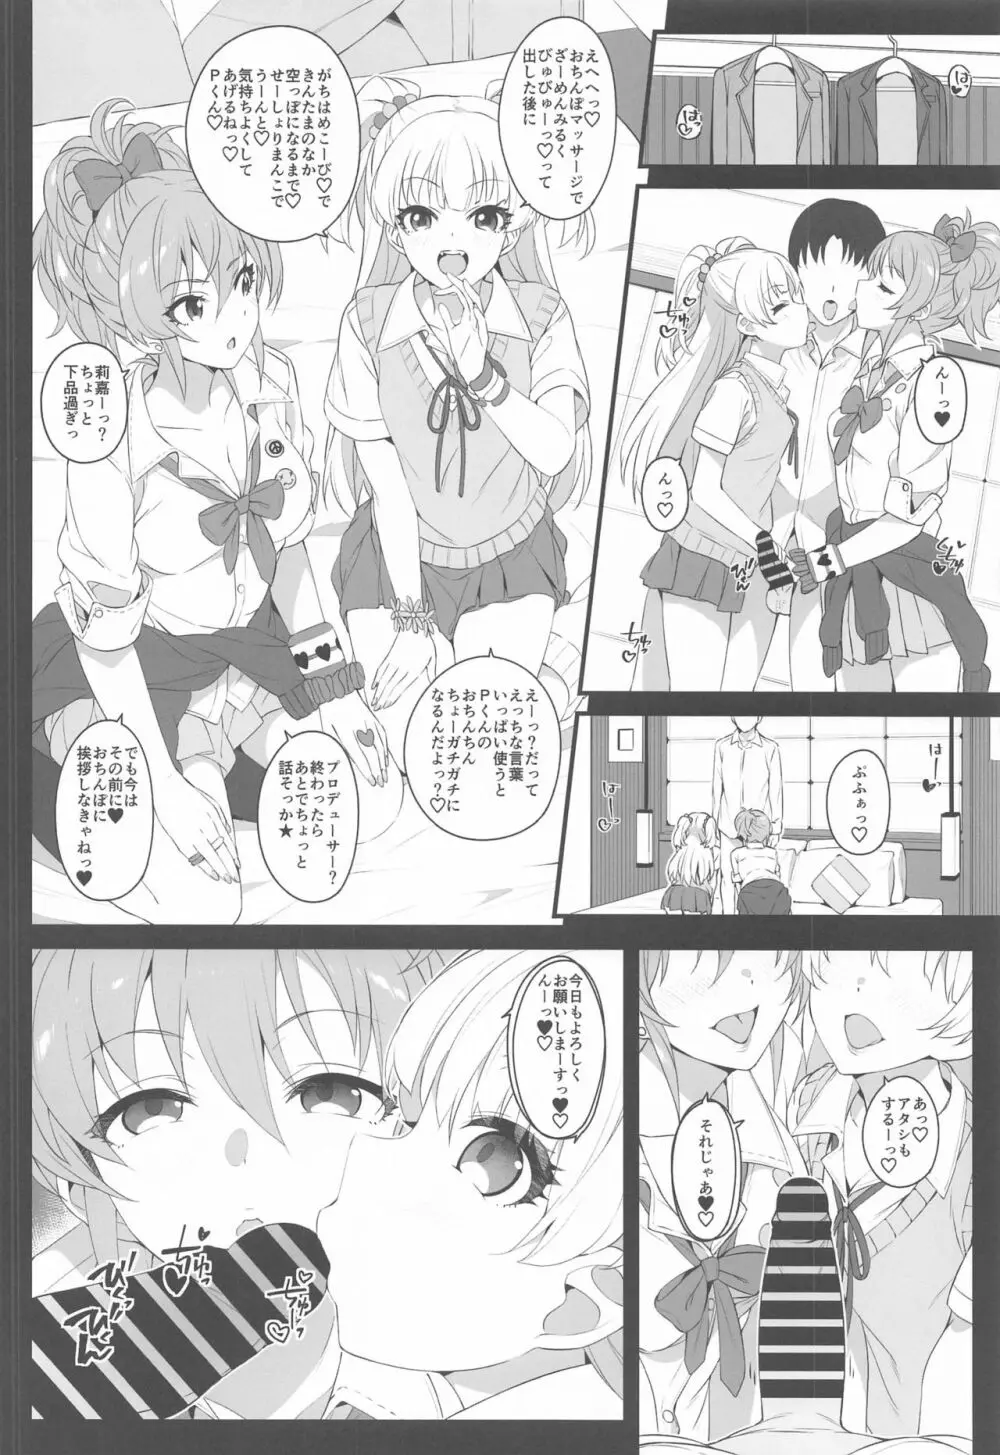 The first secret meeting of the Charismatic Queens. 9ページ